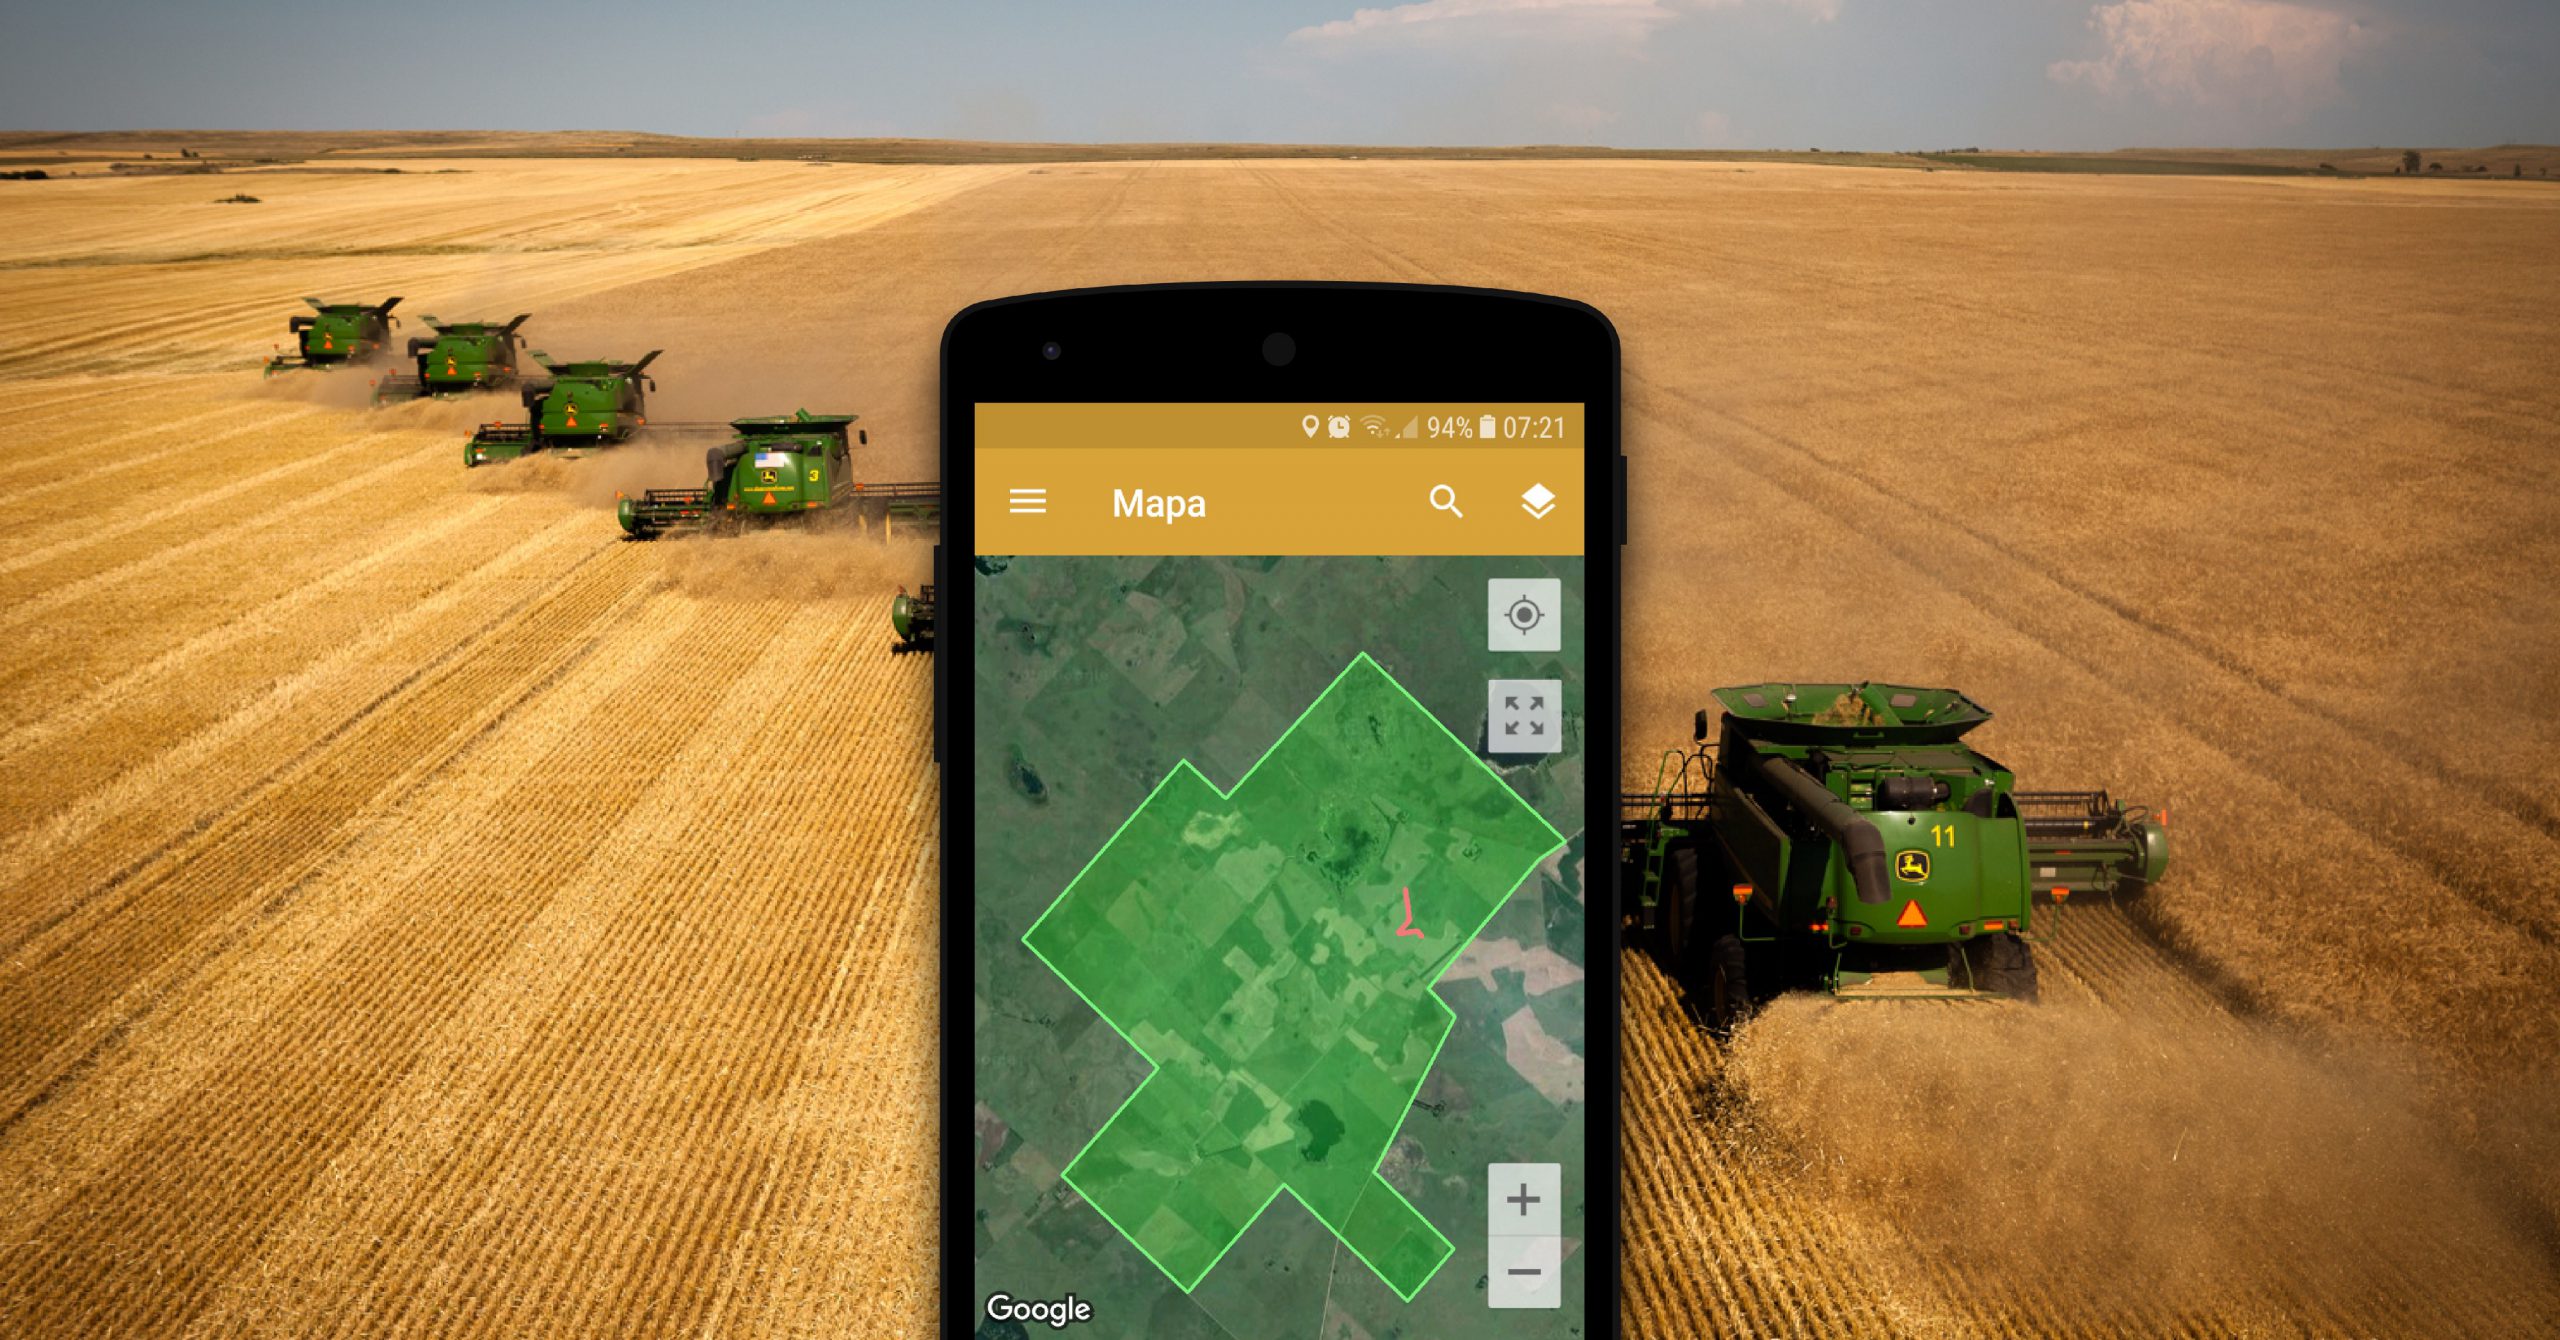 Fields area. GPS and tractor.